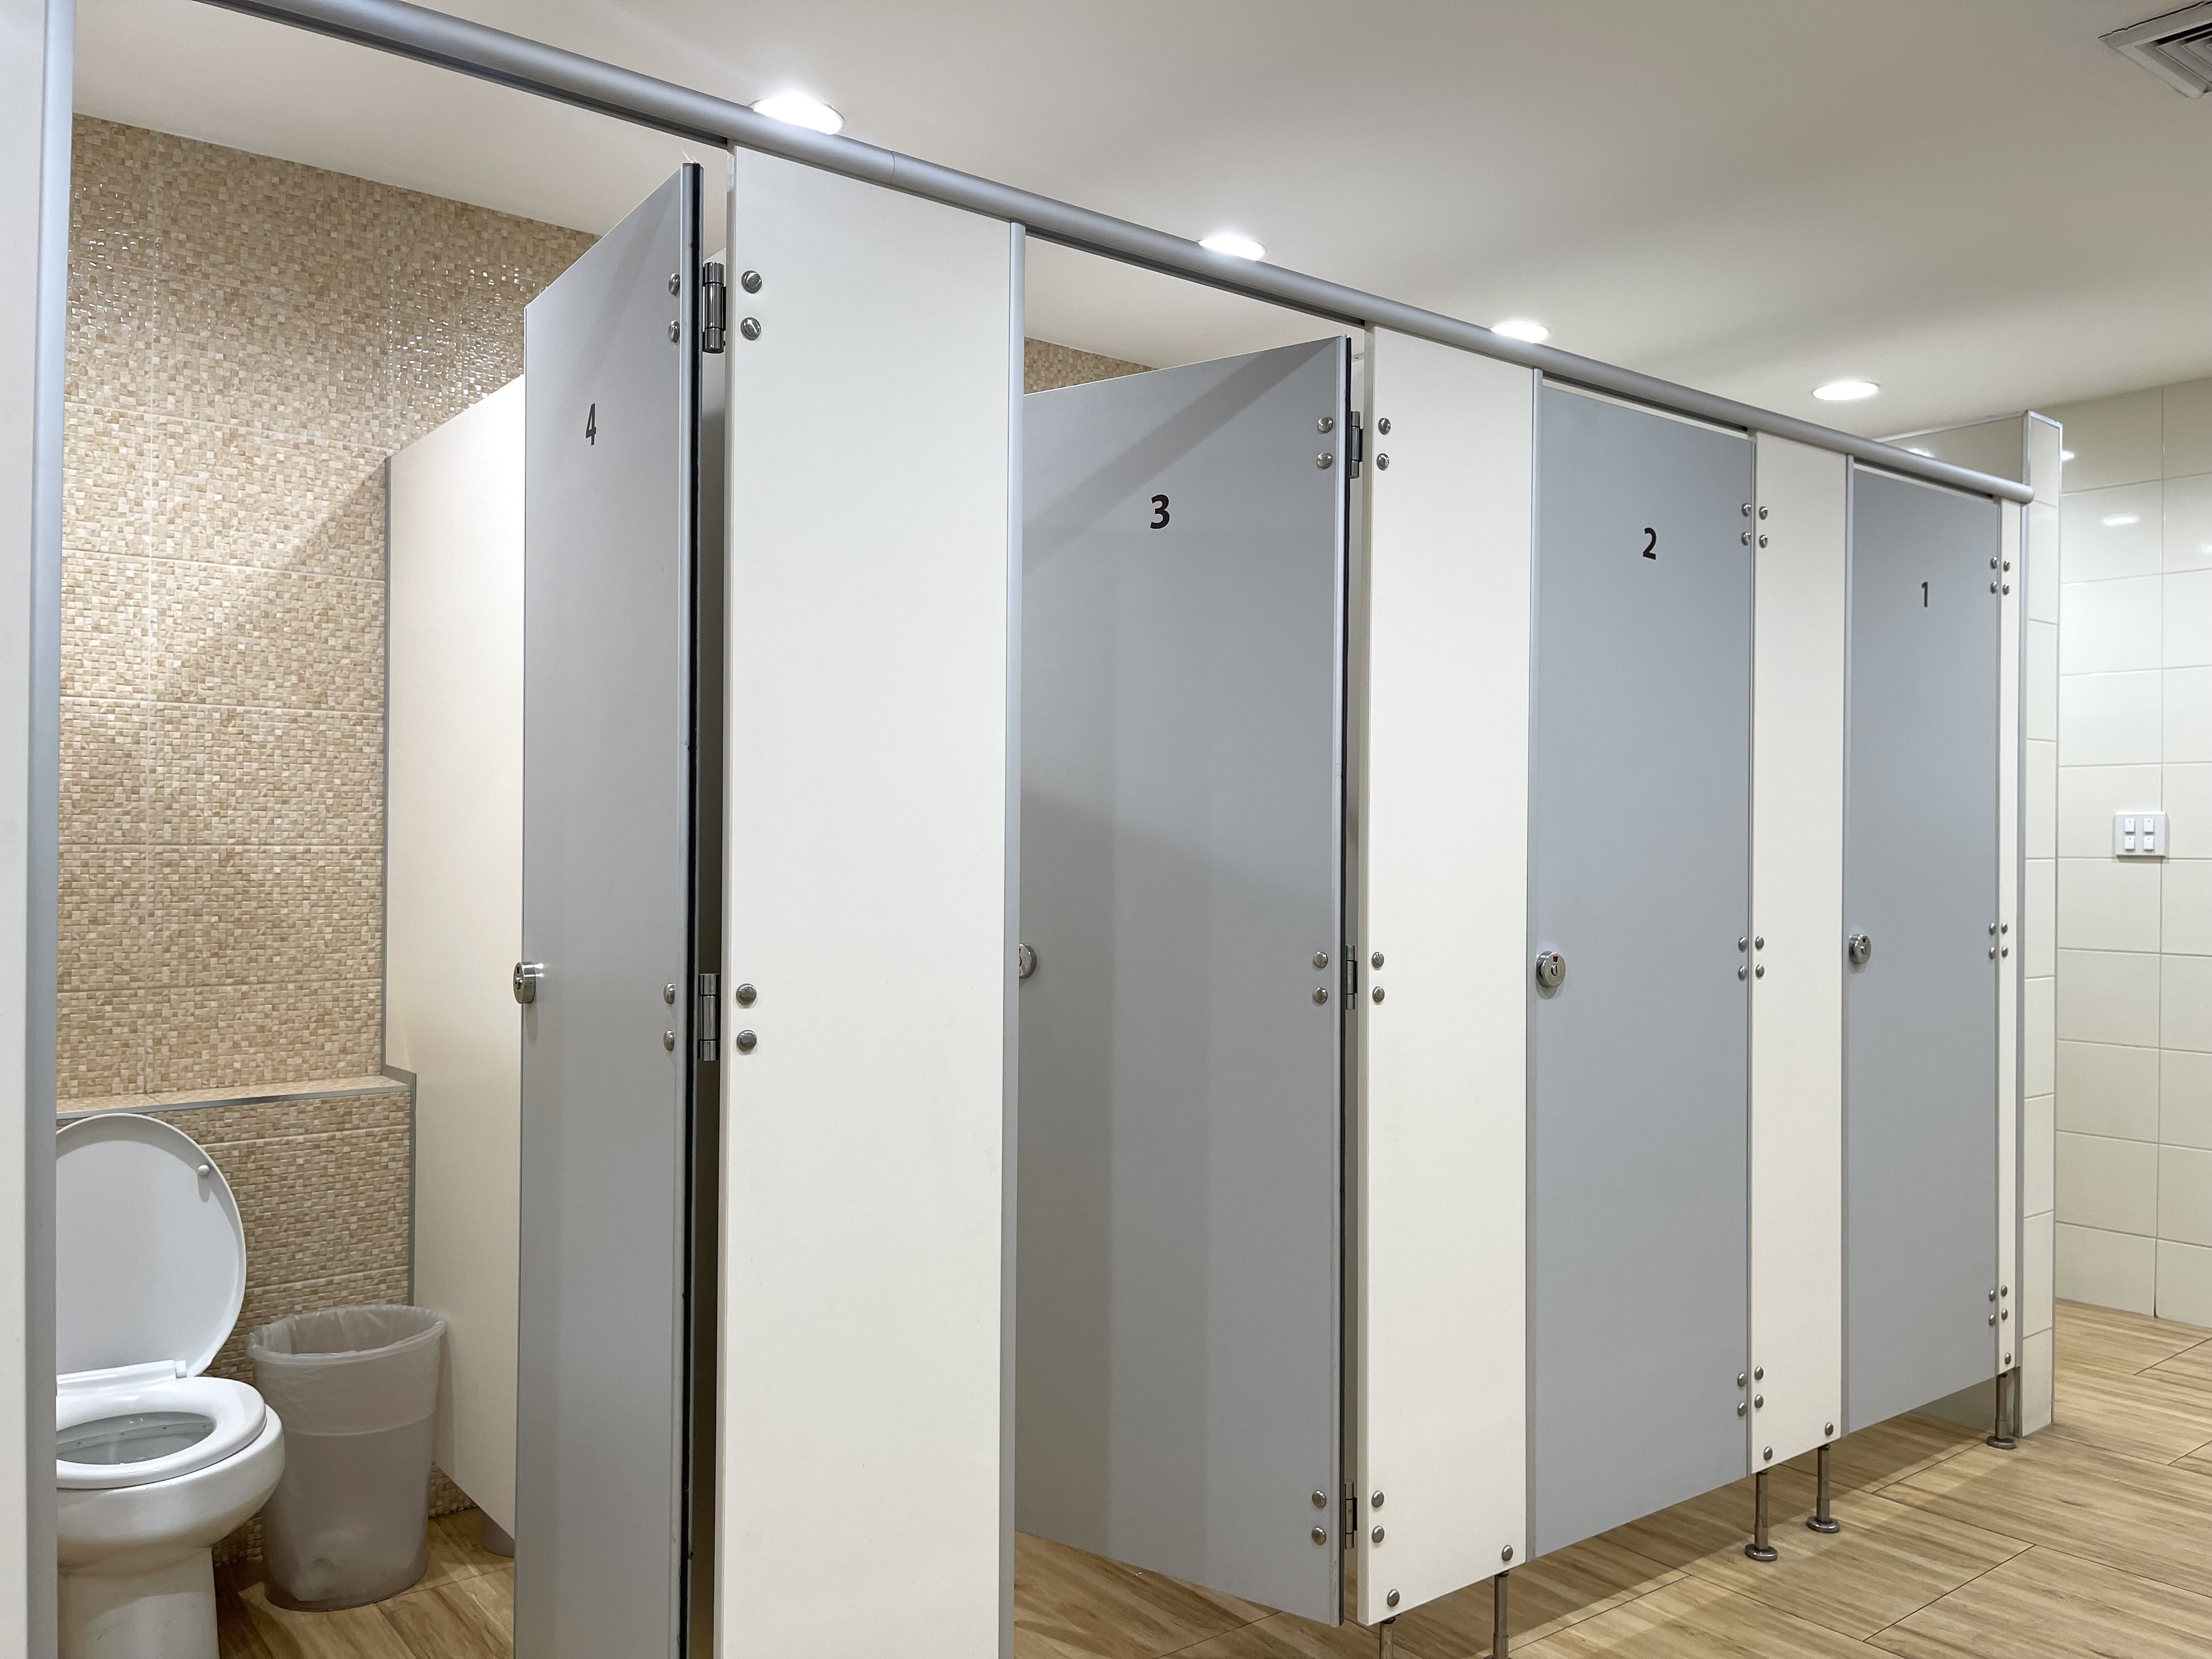 Public restrooms decoration with wooden partition